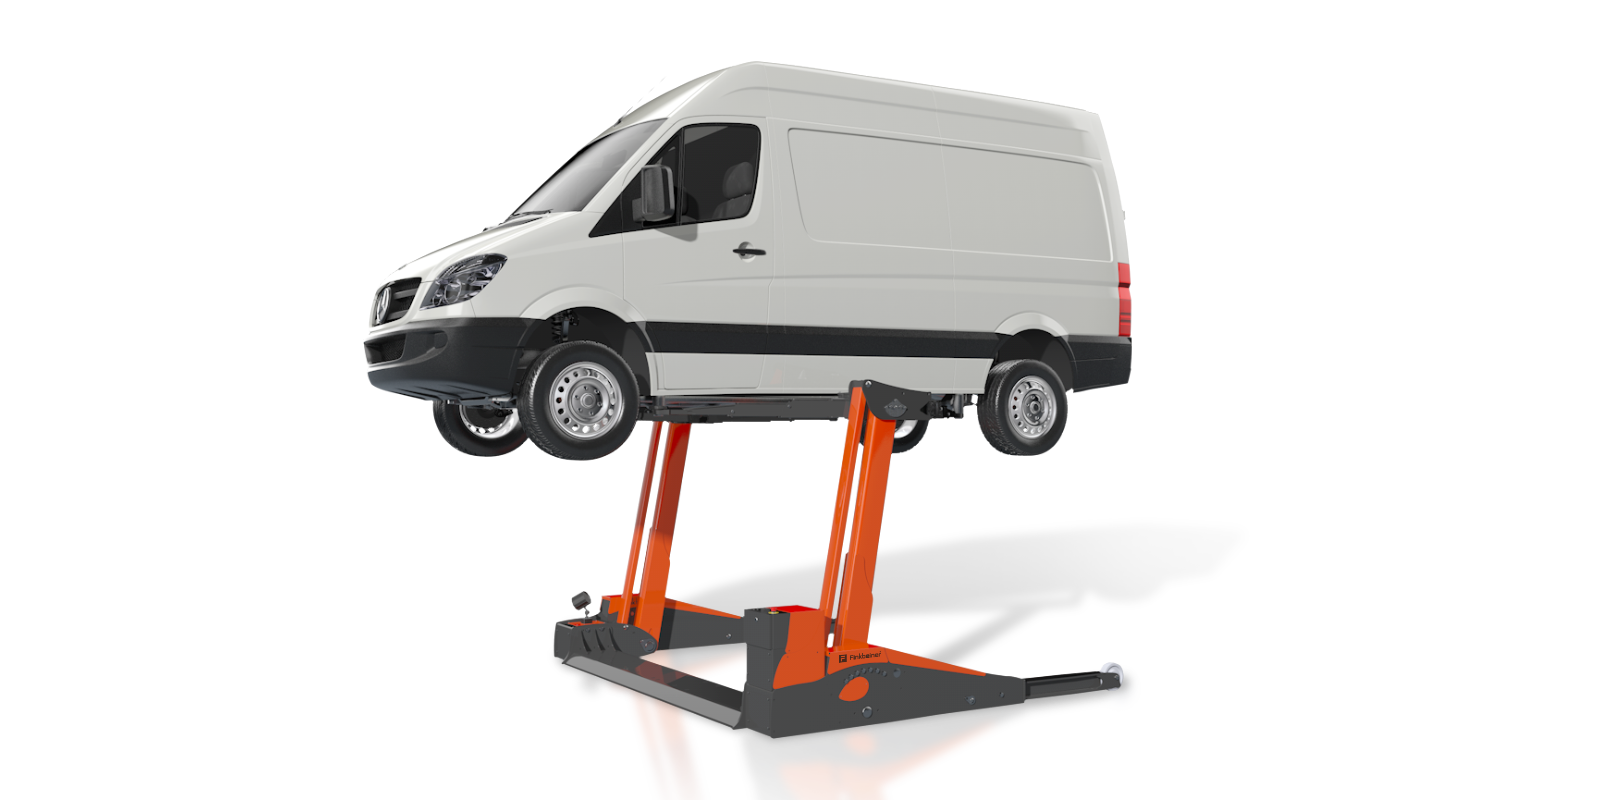 Lift FHB and Mercedes Sprinter